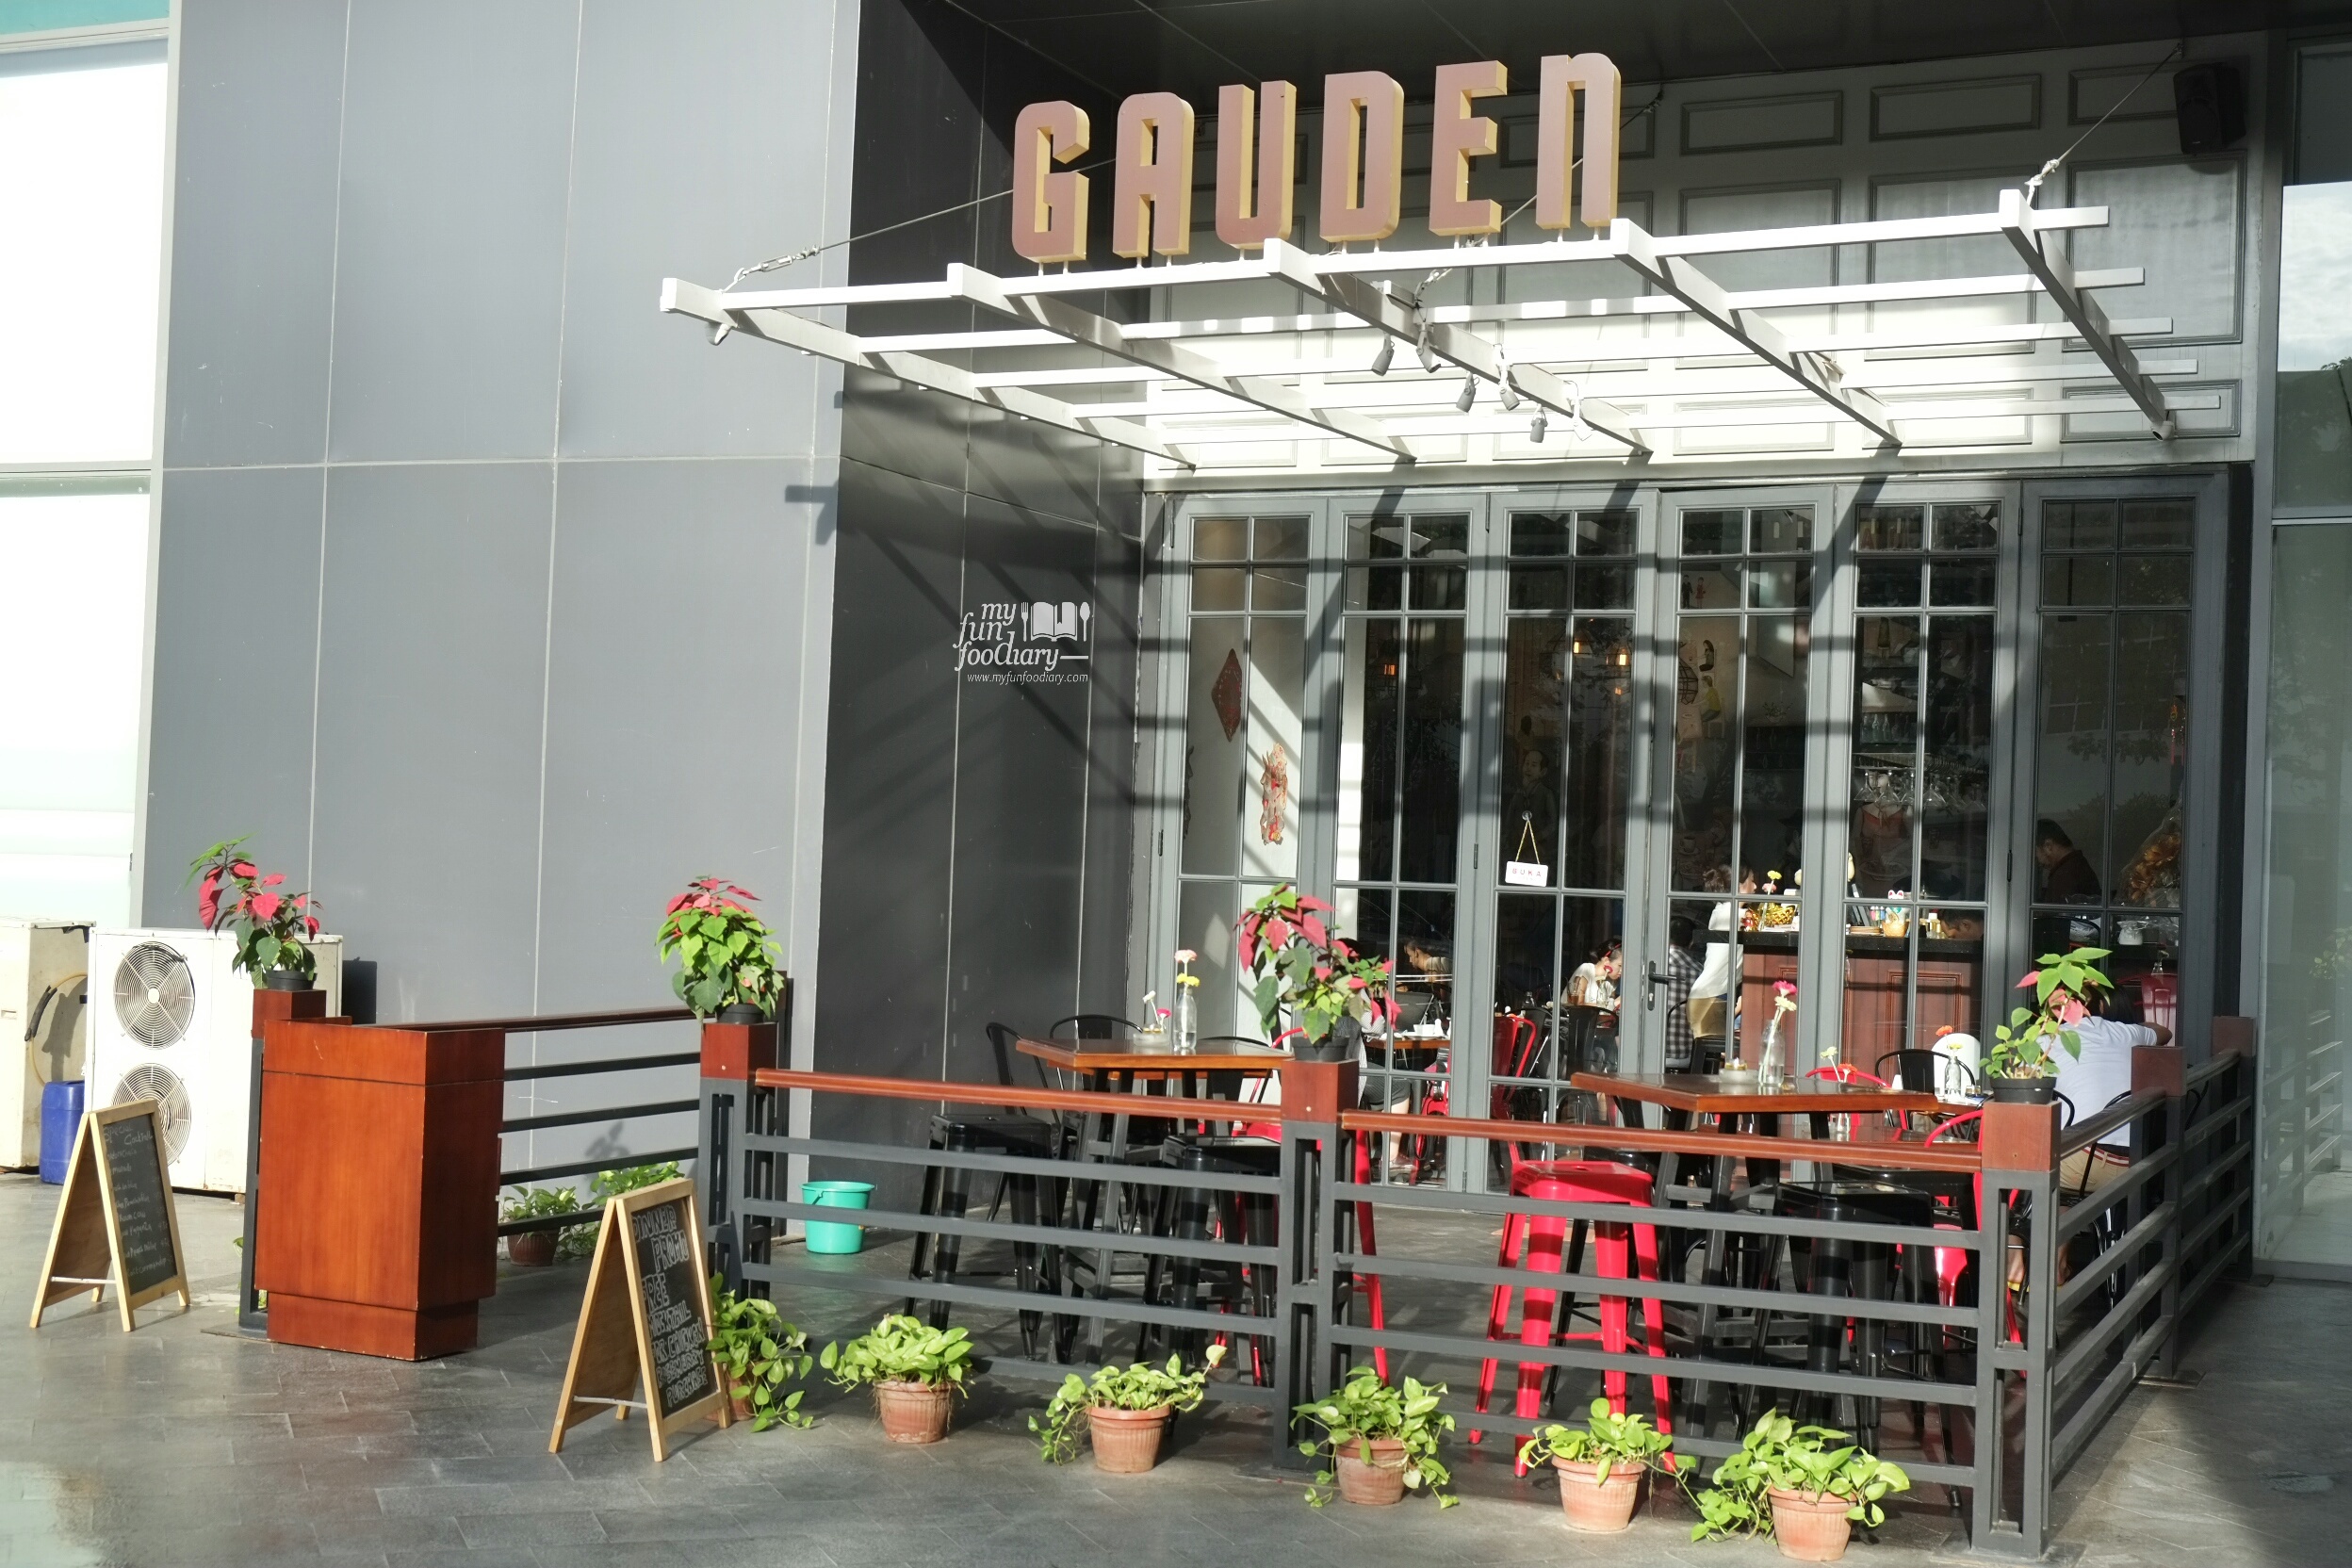 Outdoor Ambiance at Gauden Cafe and Bar by Myfunfoodiary